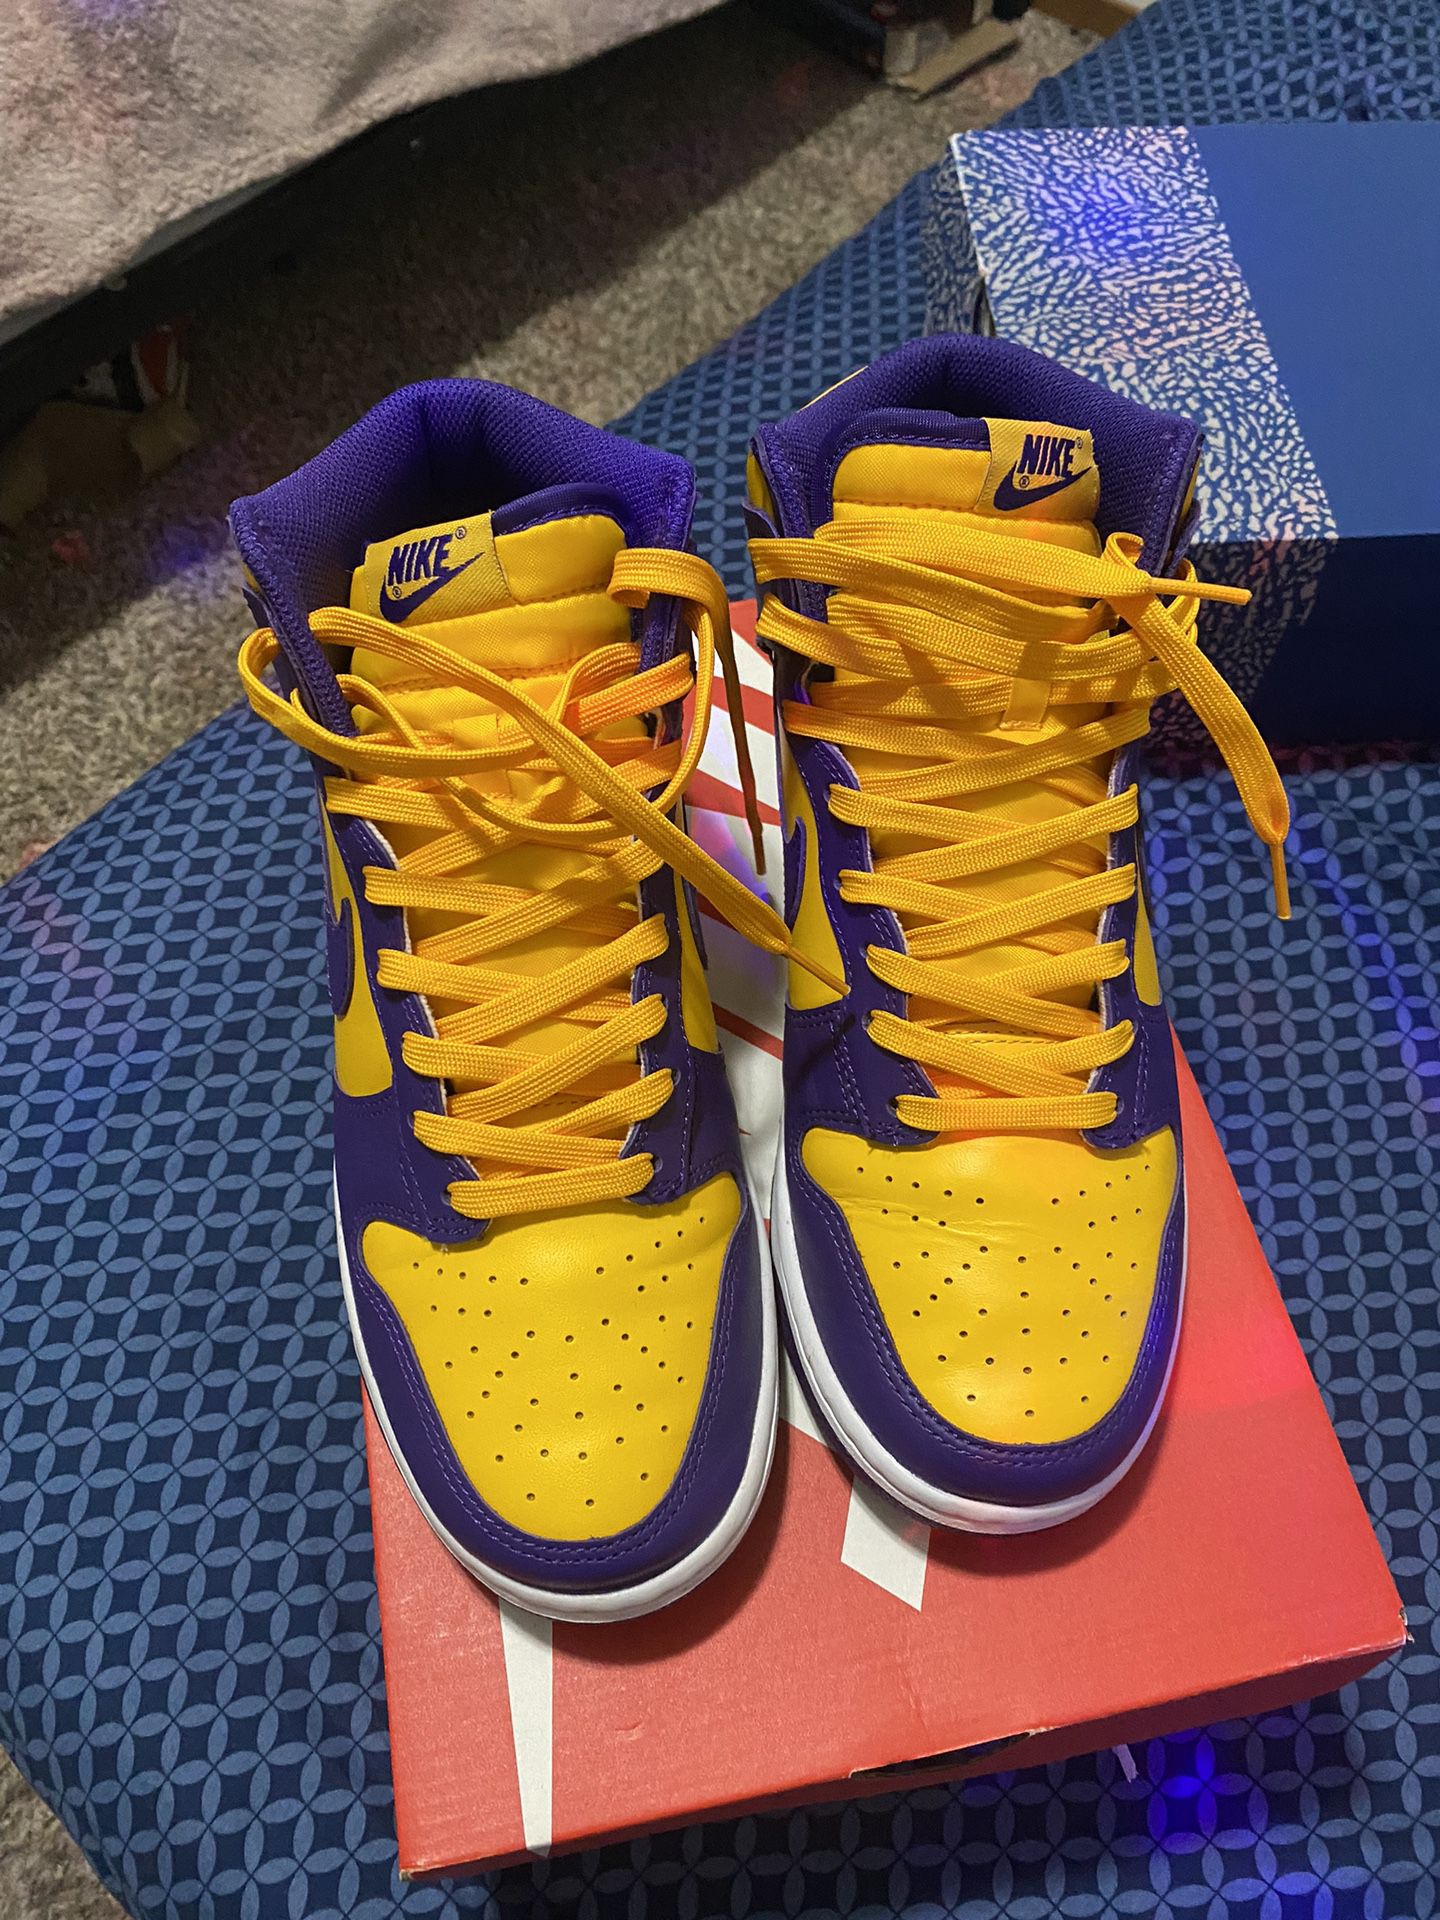  Dunk High ‘lakers’ (size 9)